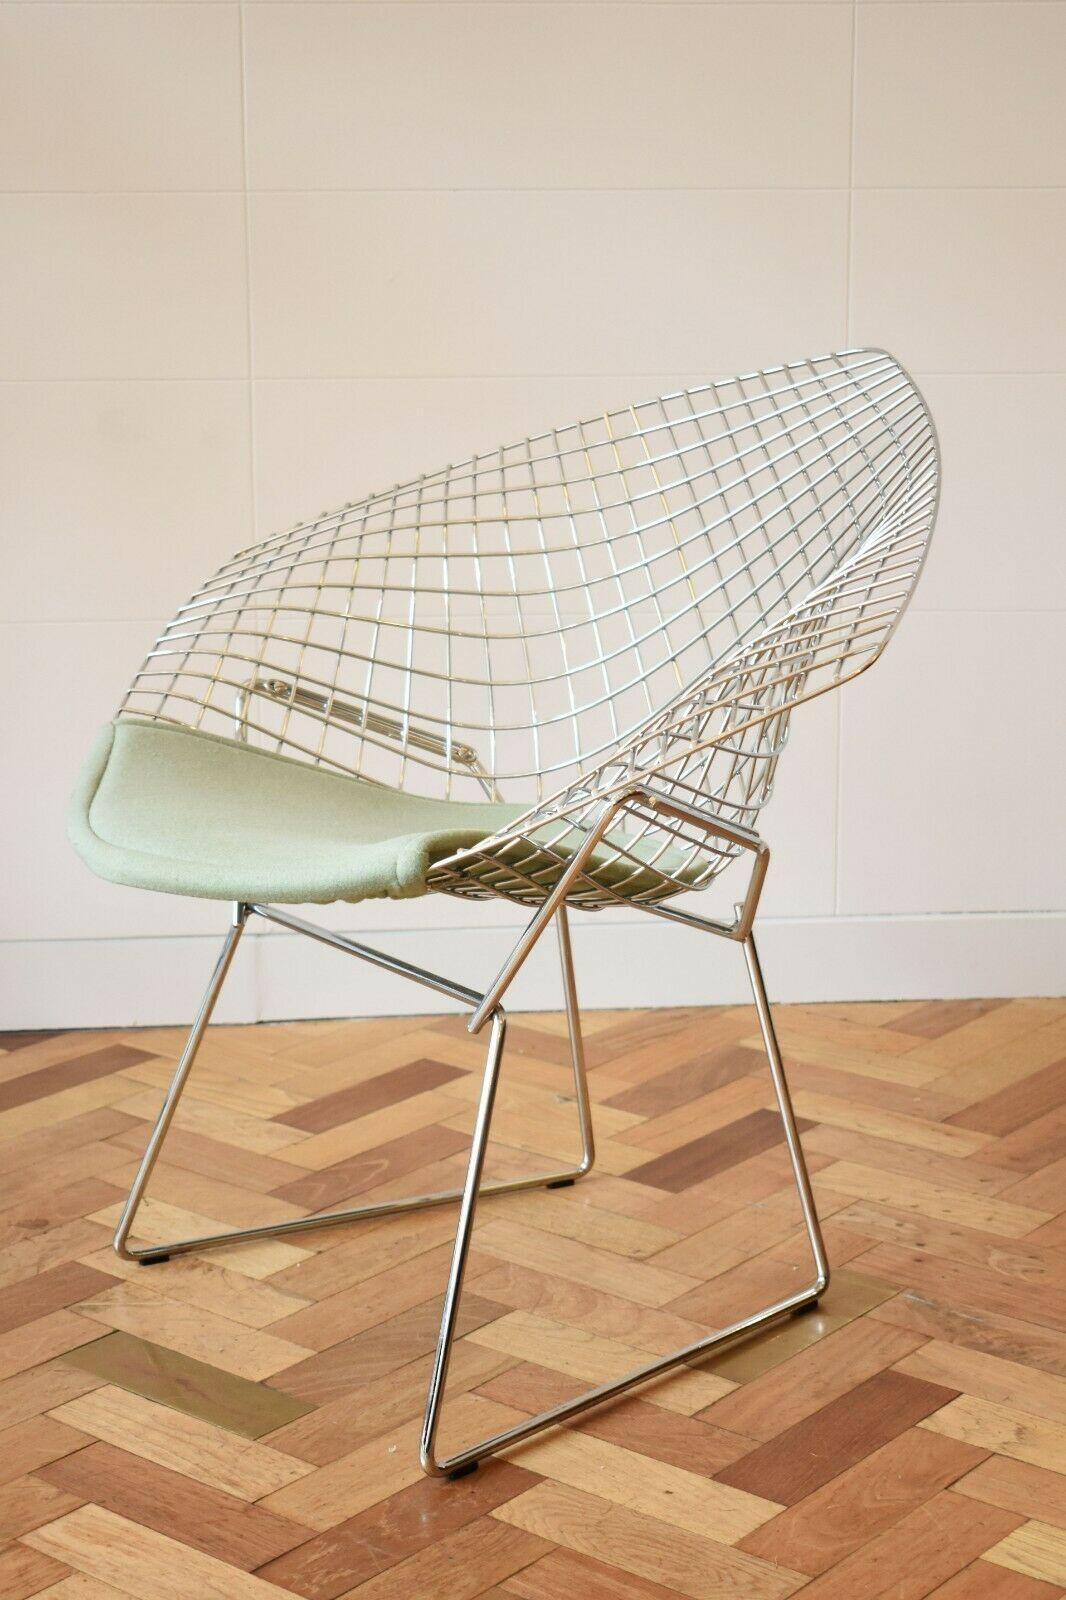 The Iconic 1952 Diamond Chair designed by Harry Bertoia as part of his Wire Collection, manufactured by Knoll International.
This amazing chair is crafted from chromed aluminium wire, interlaced into a dramatic and ergonomic diamond shape with